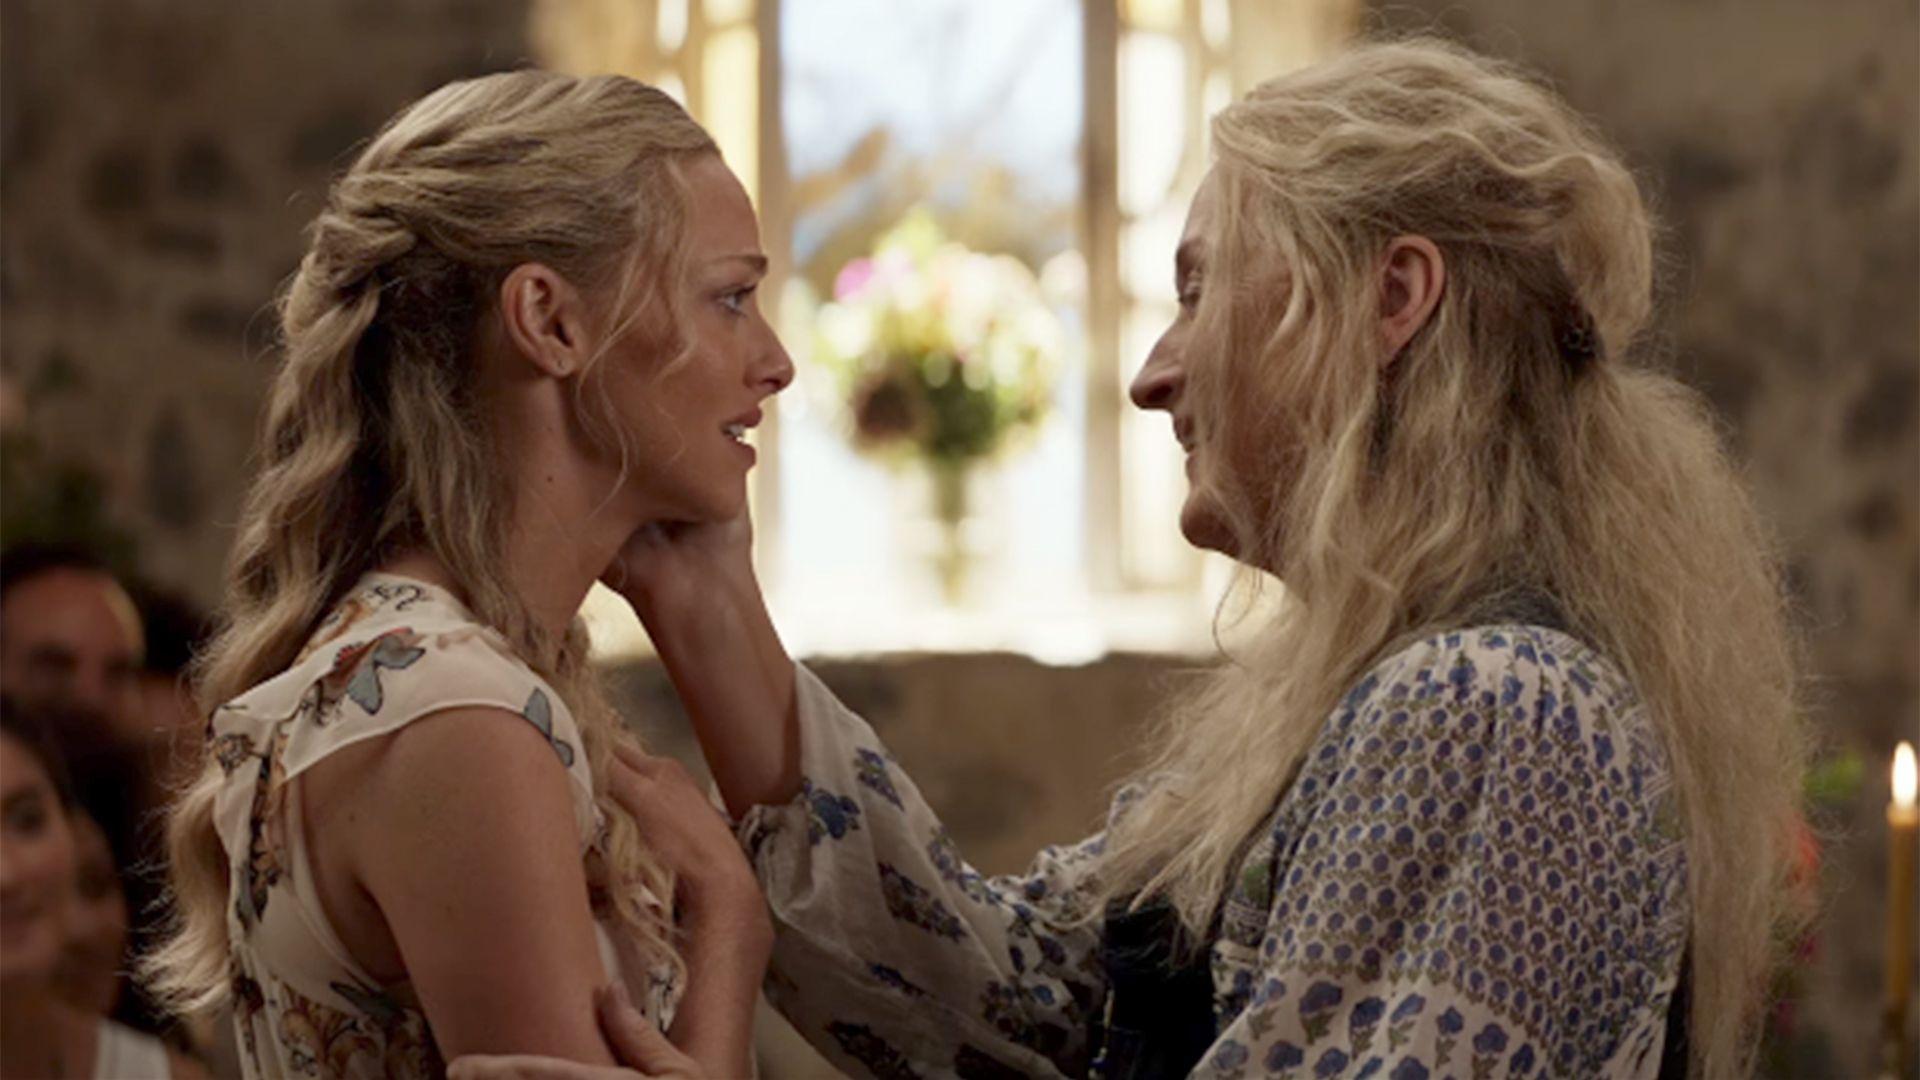 Mamma Mia: Here We Go Again' trailer released, fans asking about